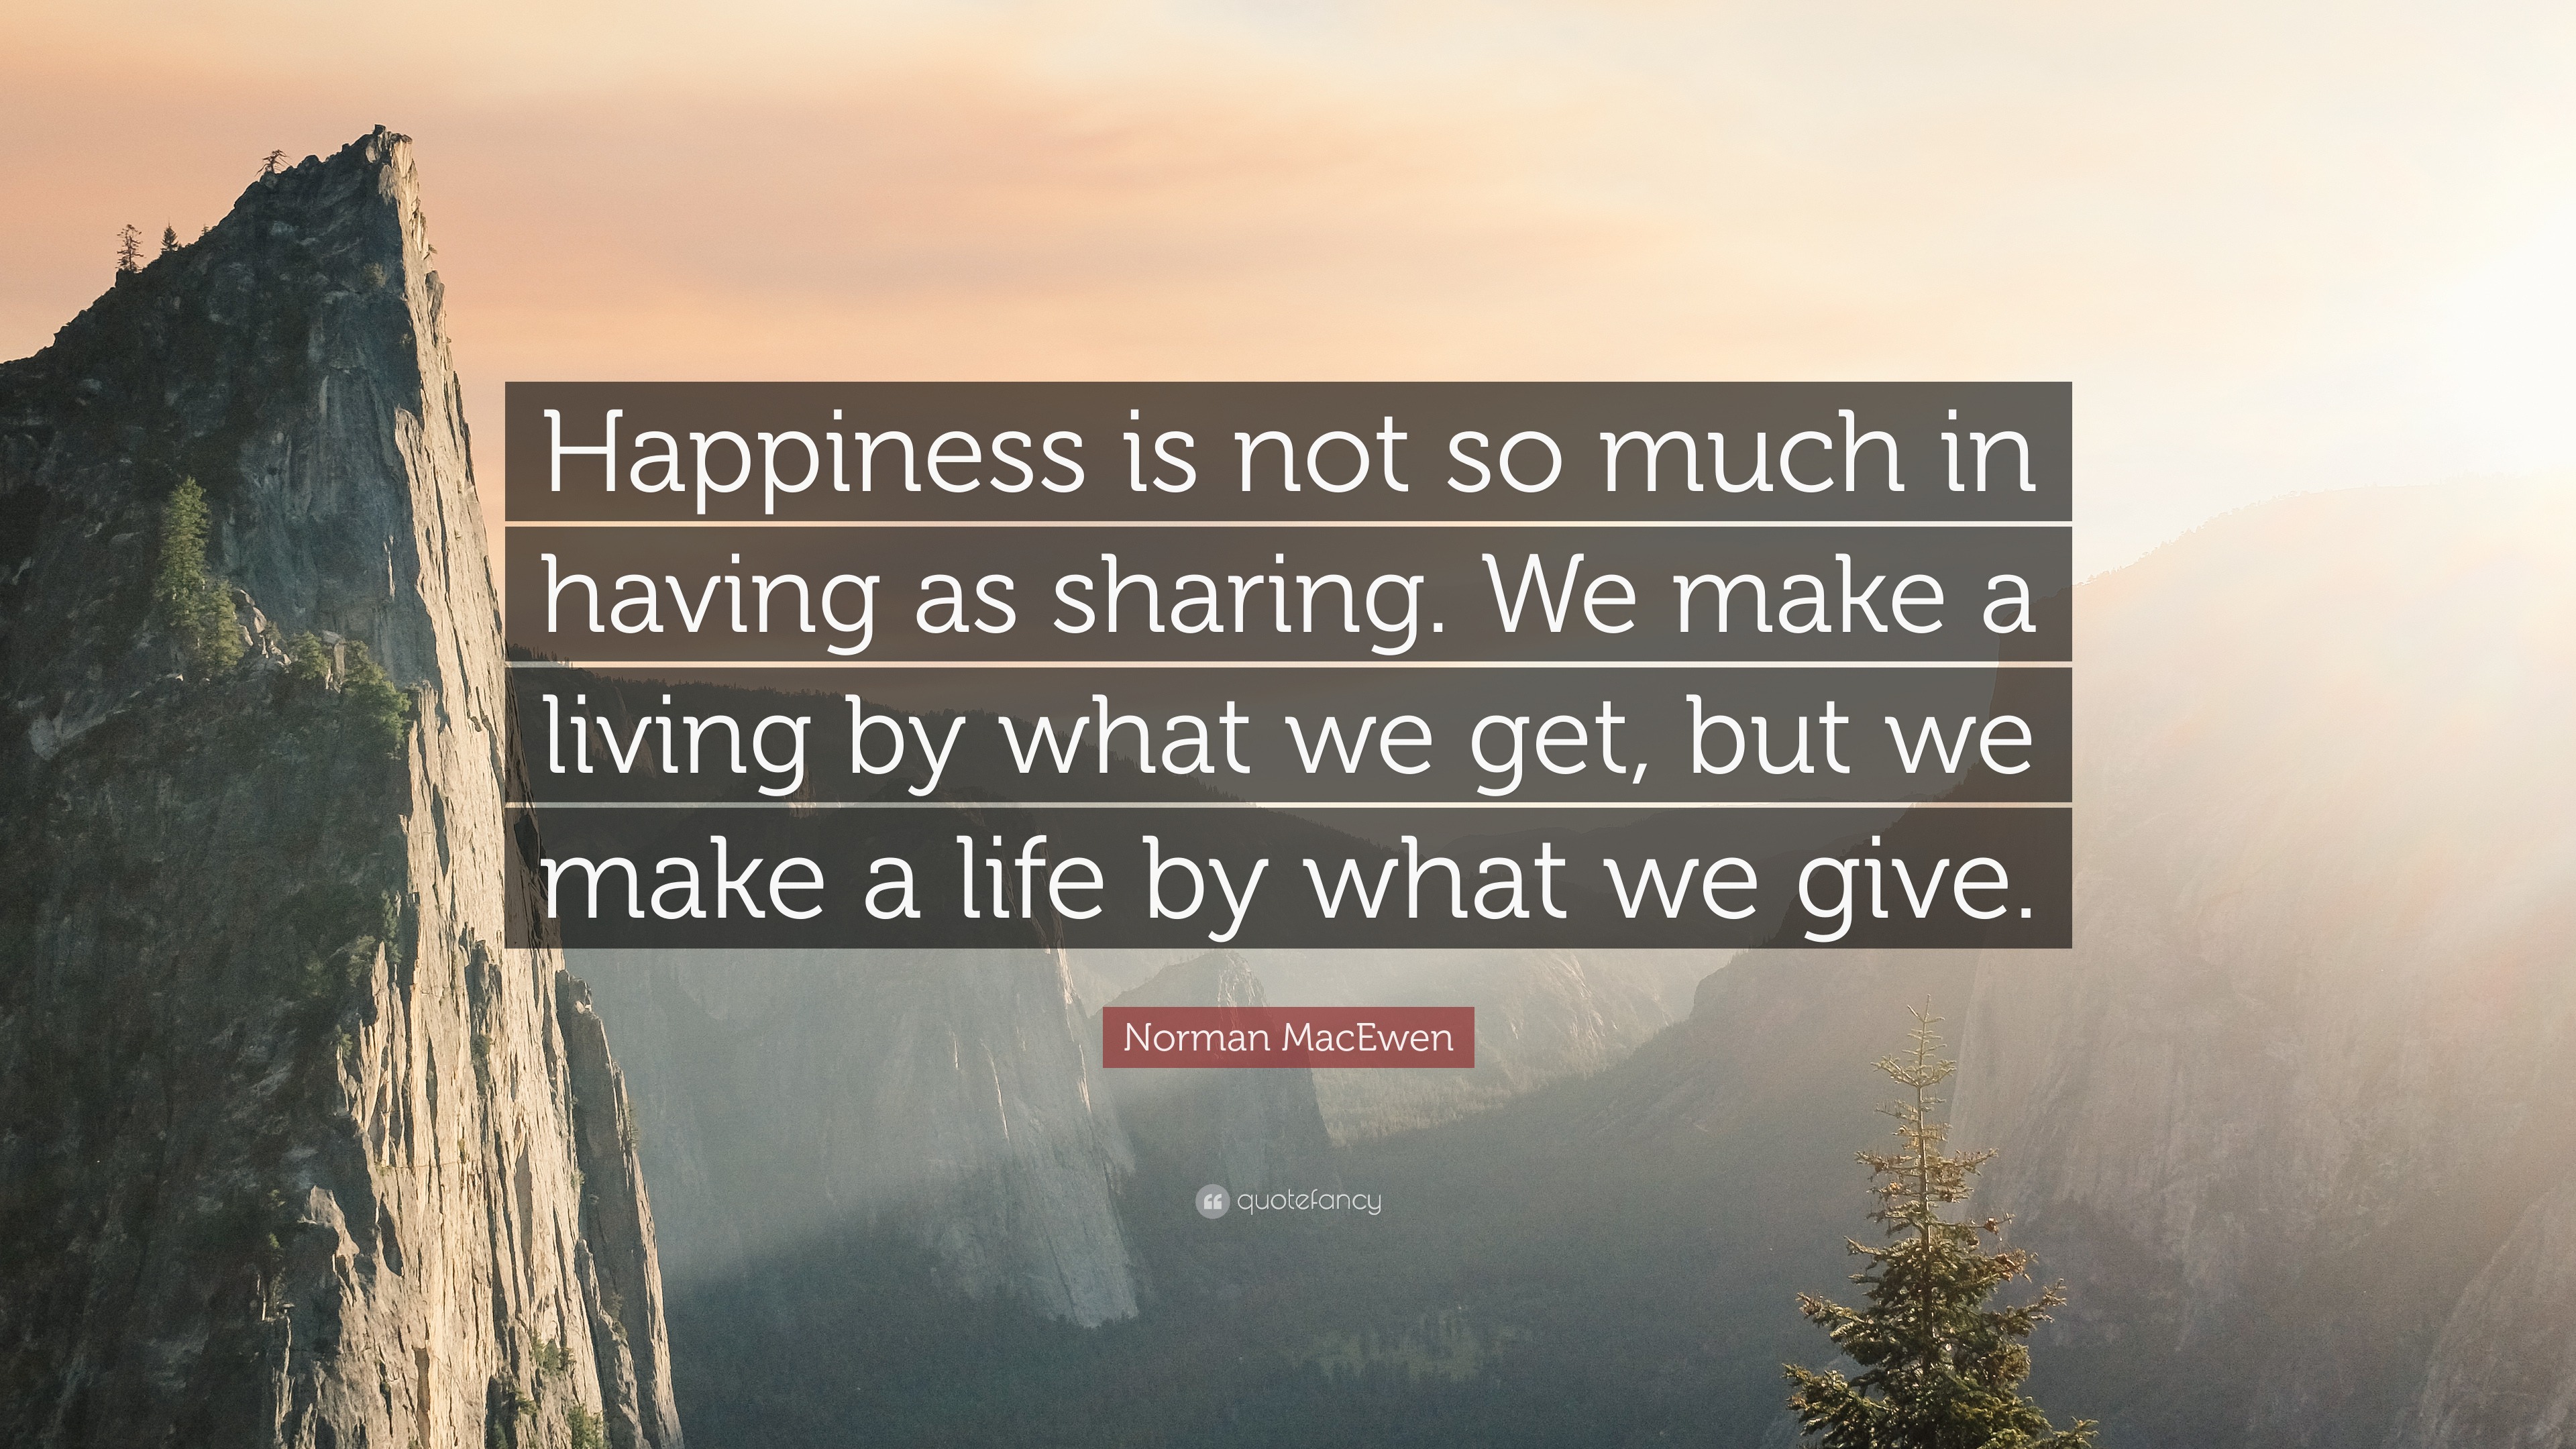 Norman MacEwen Quote: “Happiness is not so much in having as sharing ...